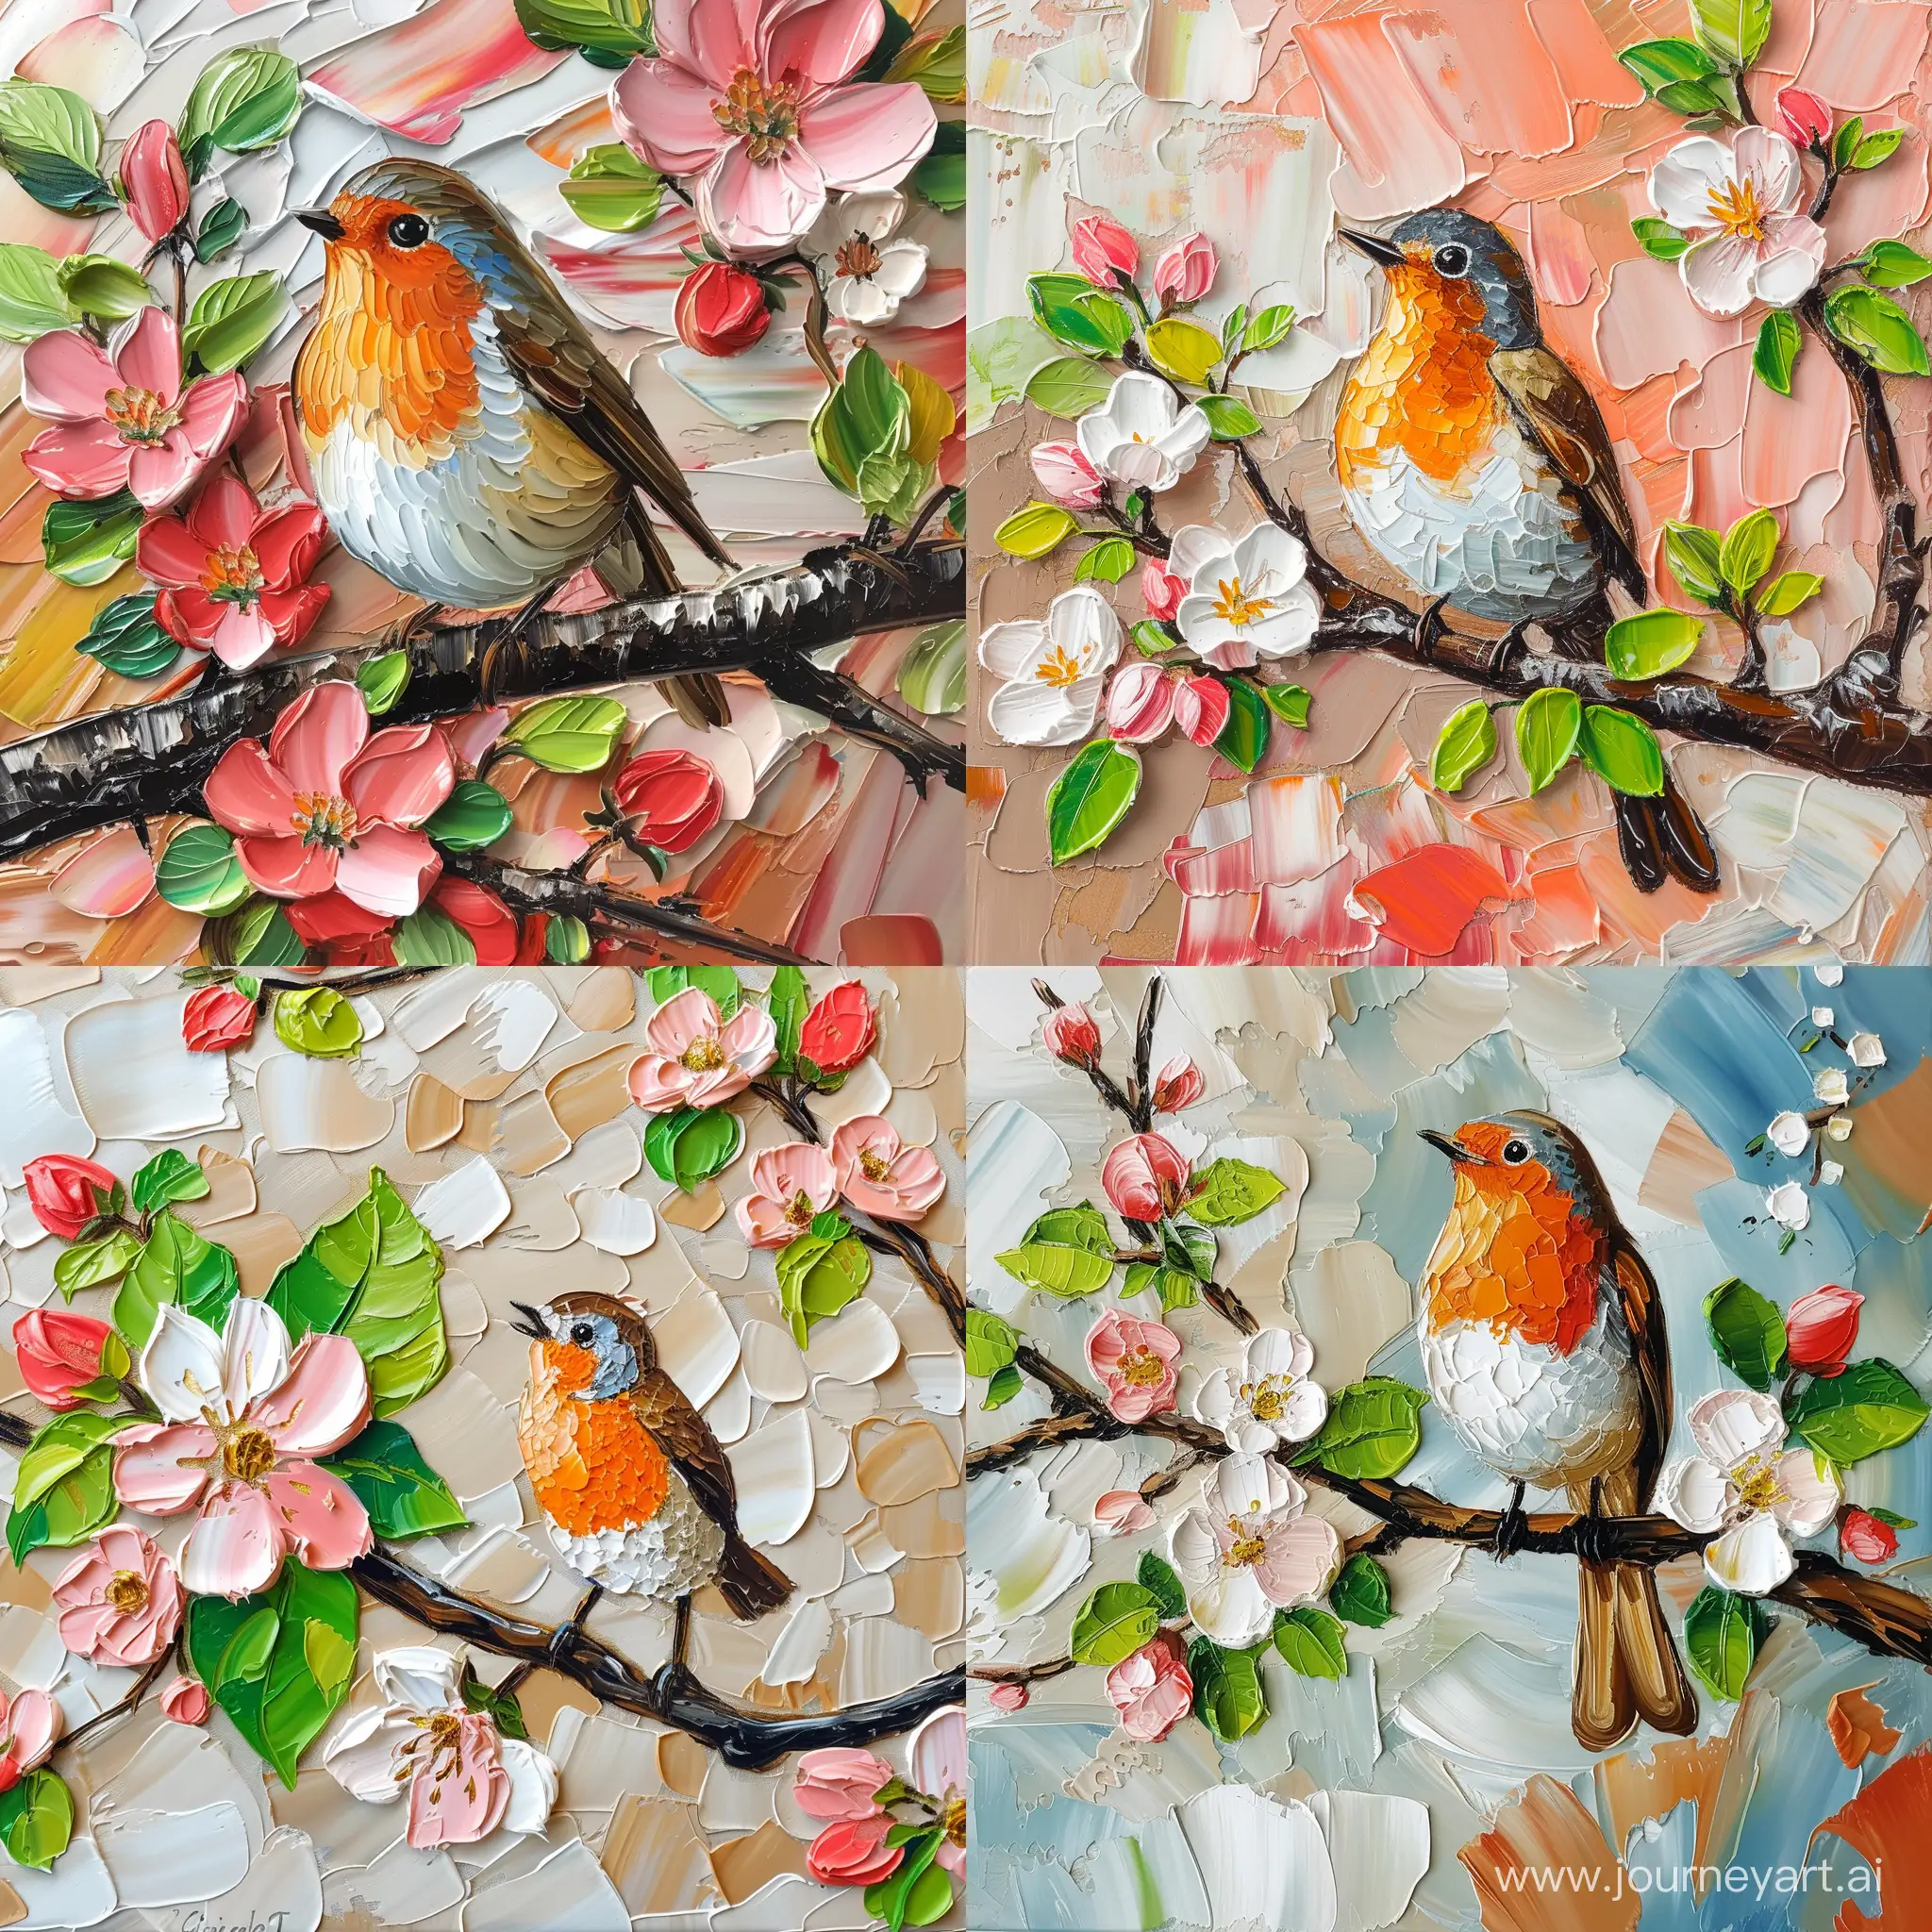 oil painting, clean smooth painted brush stroke branch with apple blossom flowers with detailed centers, robin bird sitting on branch, abstract brush stroke background